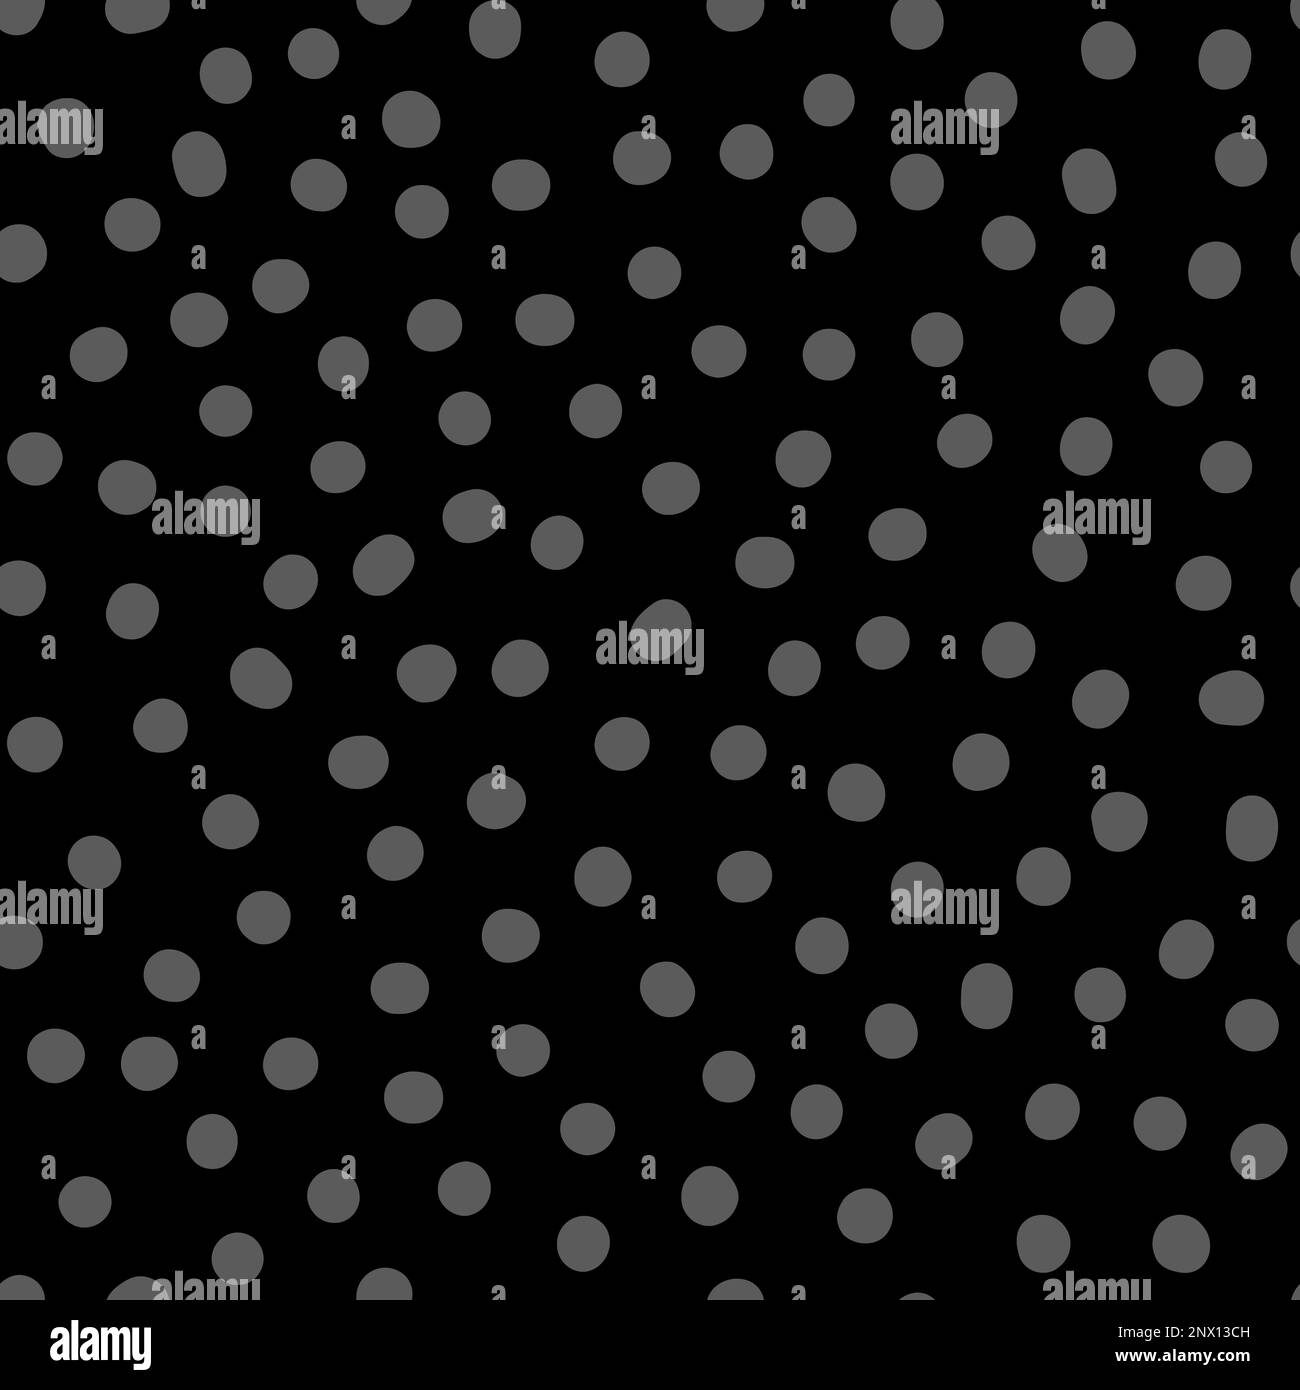 Seamless neutral polka dots pattern. Grey hand-drawn circles on Black background. Abstract Random points ornament. Vector halftone illustration for wa Stock Vector